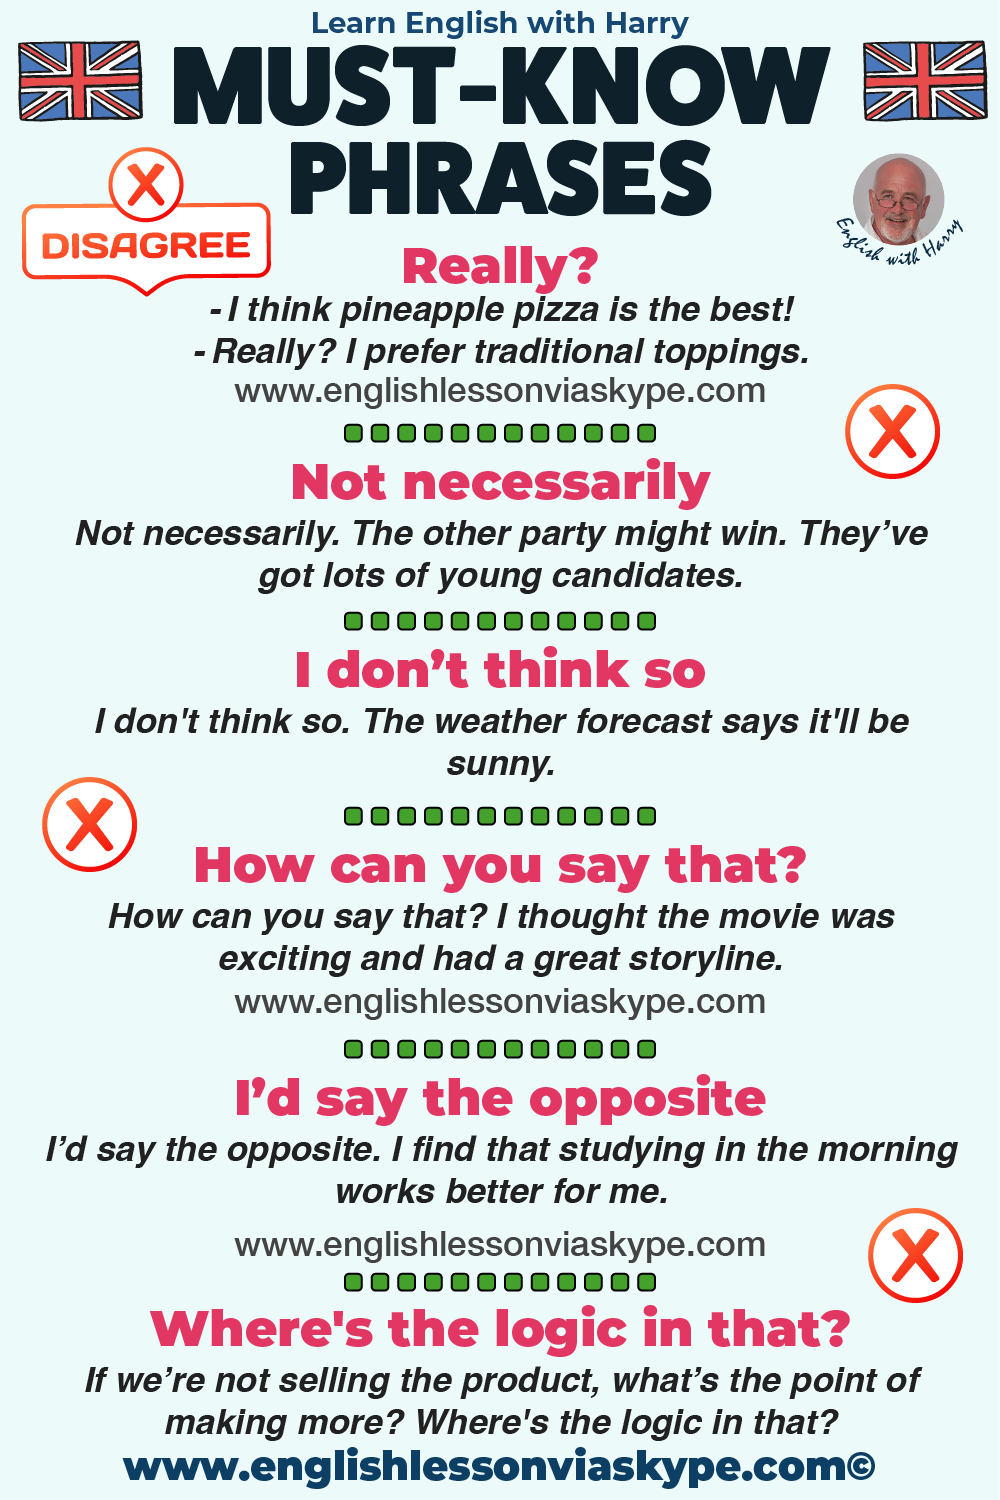 How to disagree in English politely. English speaking skills. Improve English speaking skills. Upgrade your vocabulary. English grammar rules. Improve English speaking. Advanced English lessons on Zoom and Skype. Improve English speaking and writing skills. #learnenglish